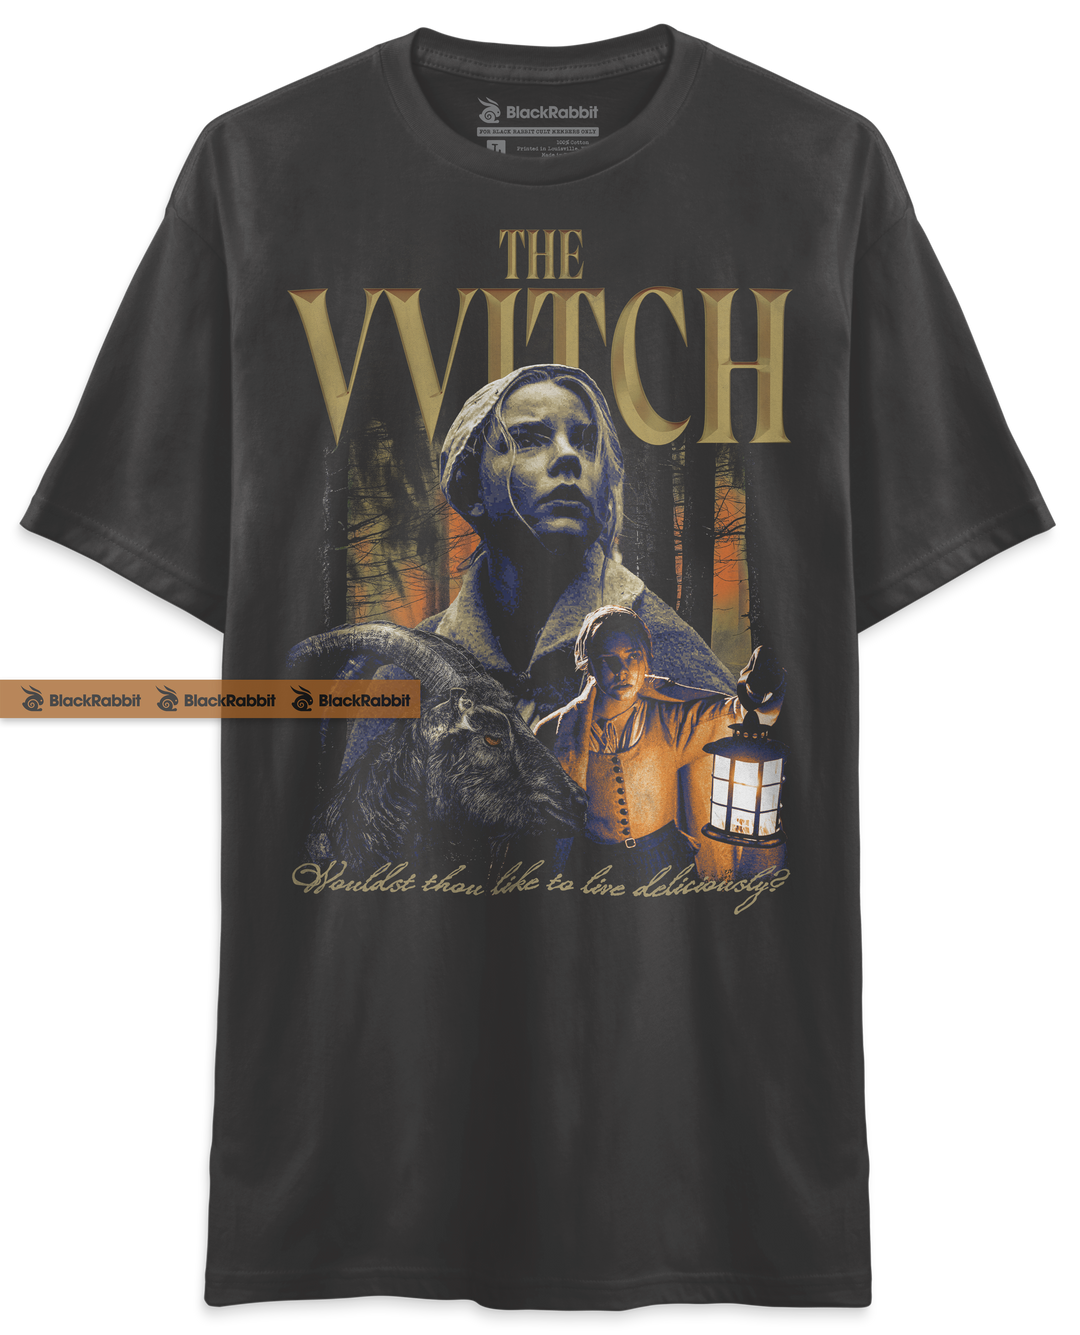 The Witch (The VVitch) Unisex Classic T-Shirt